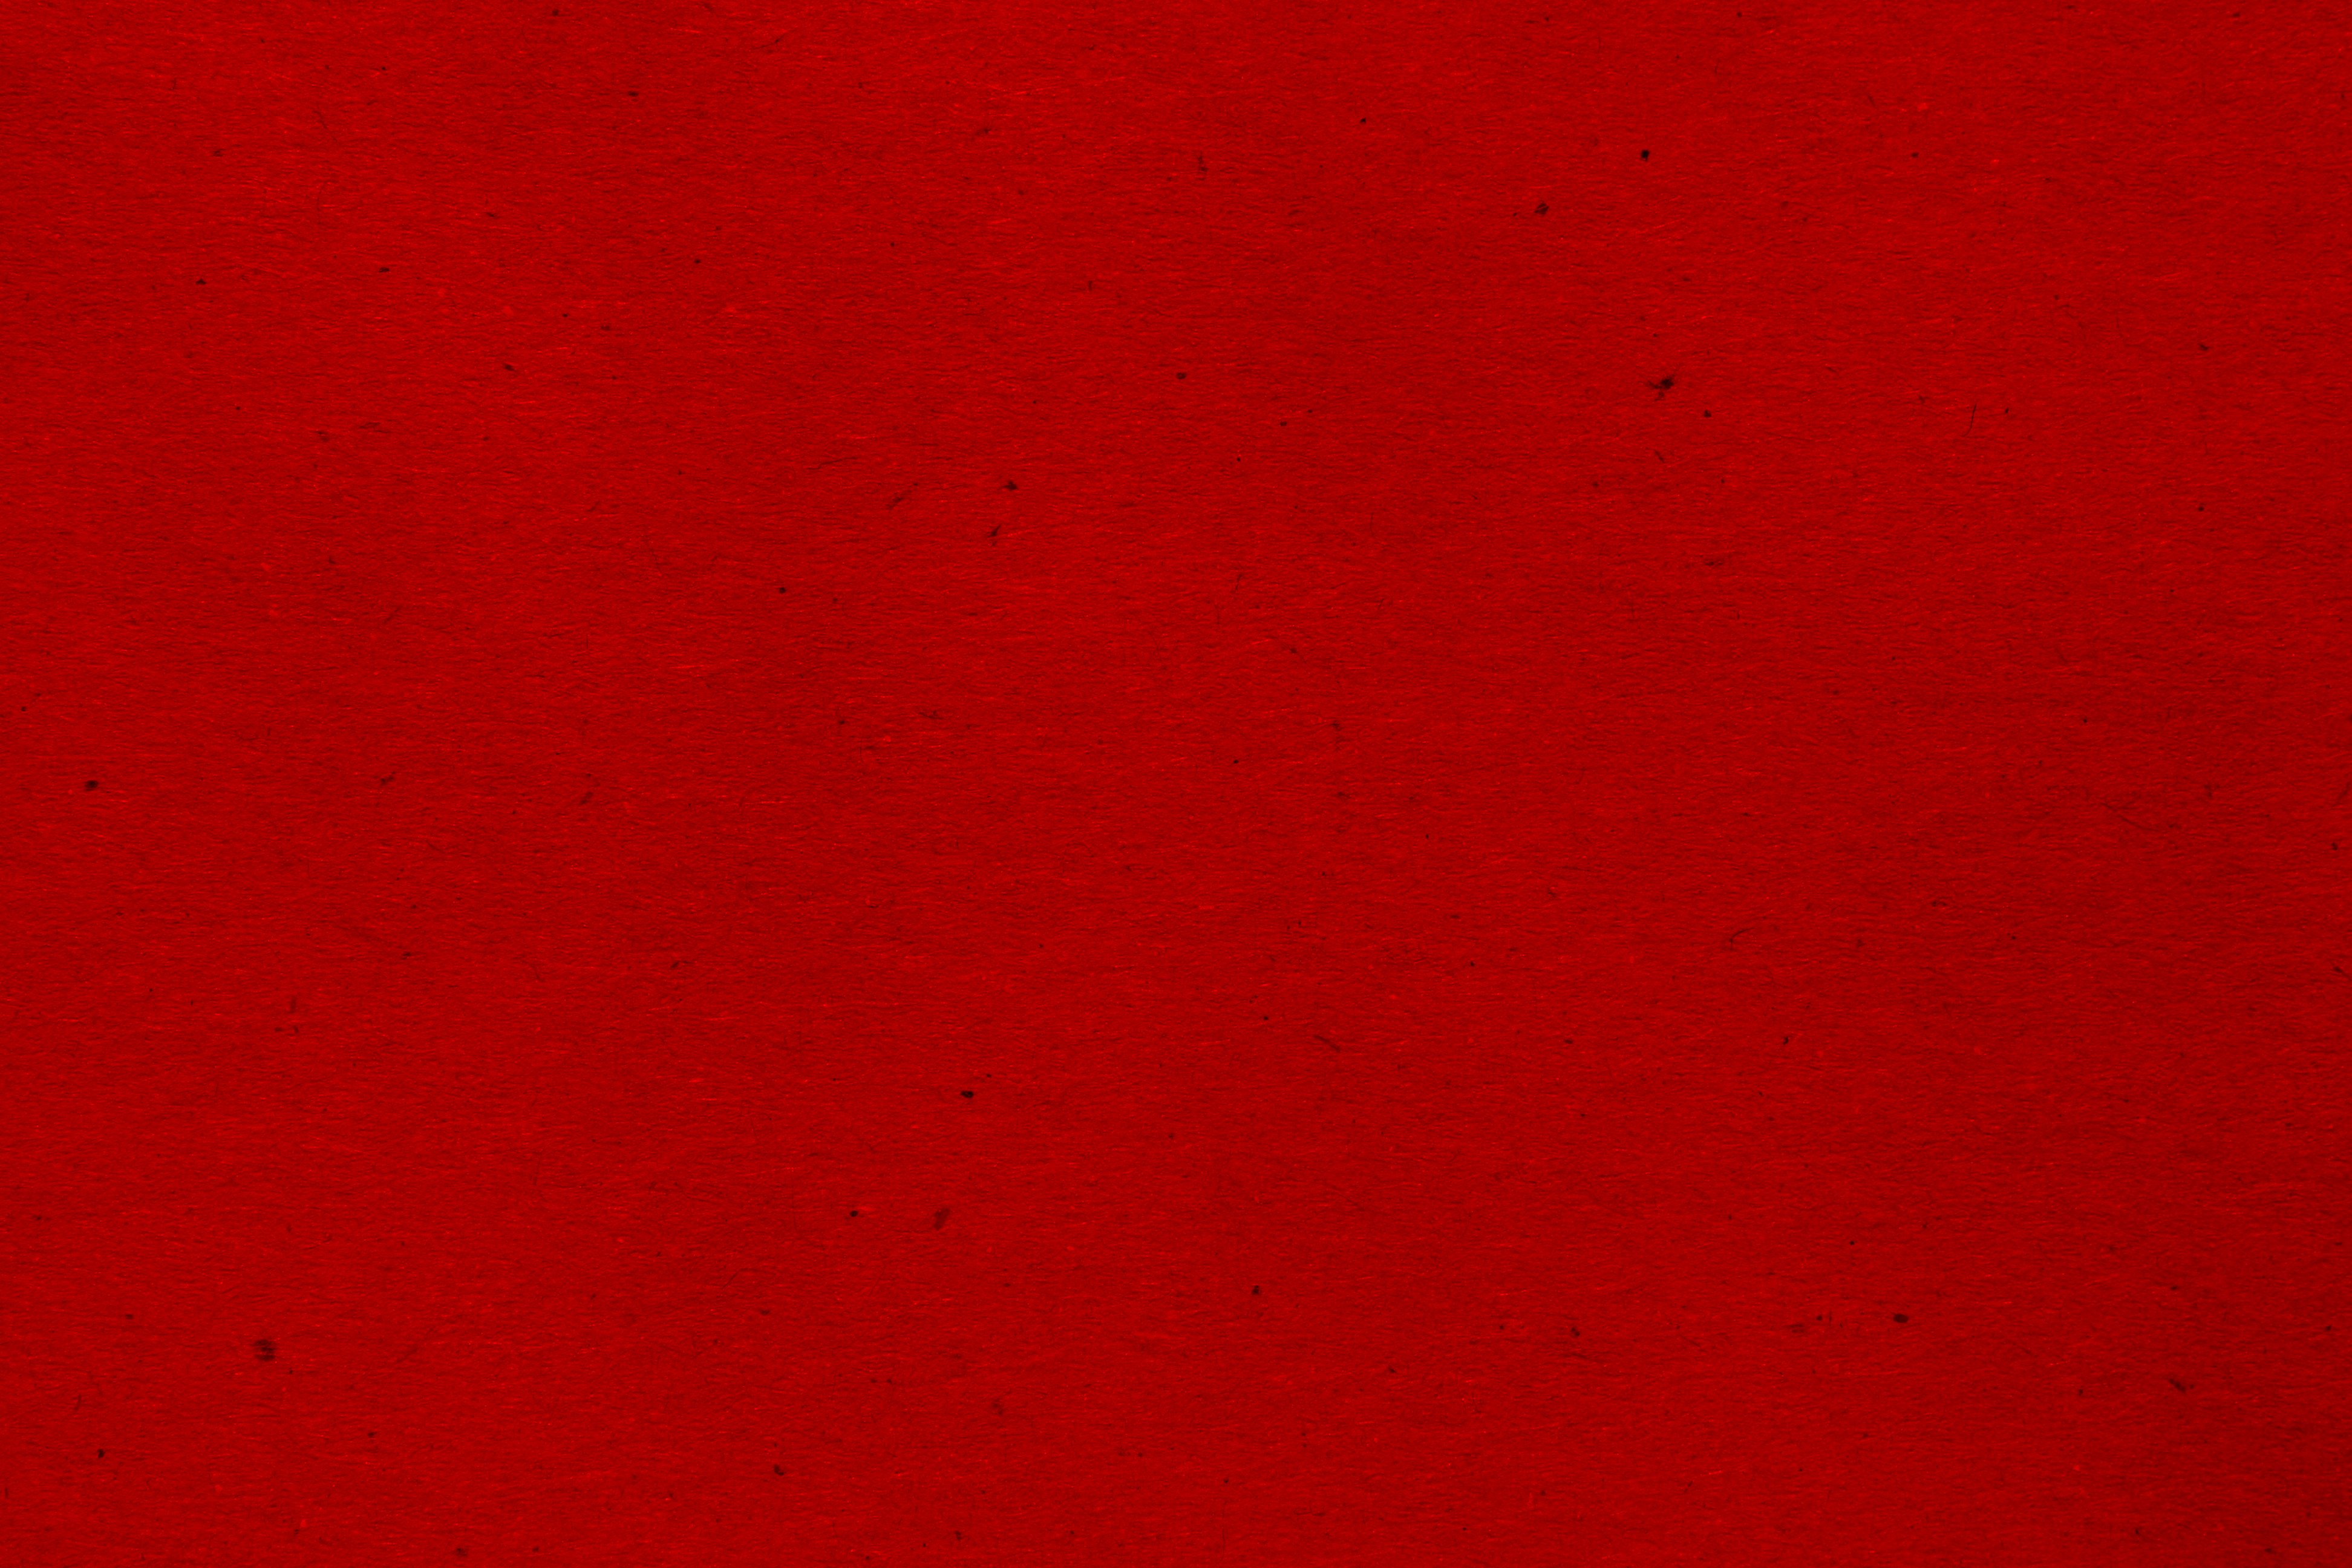 Deep Red Paper Texture With Flecks Picture Photograph Photos